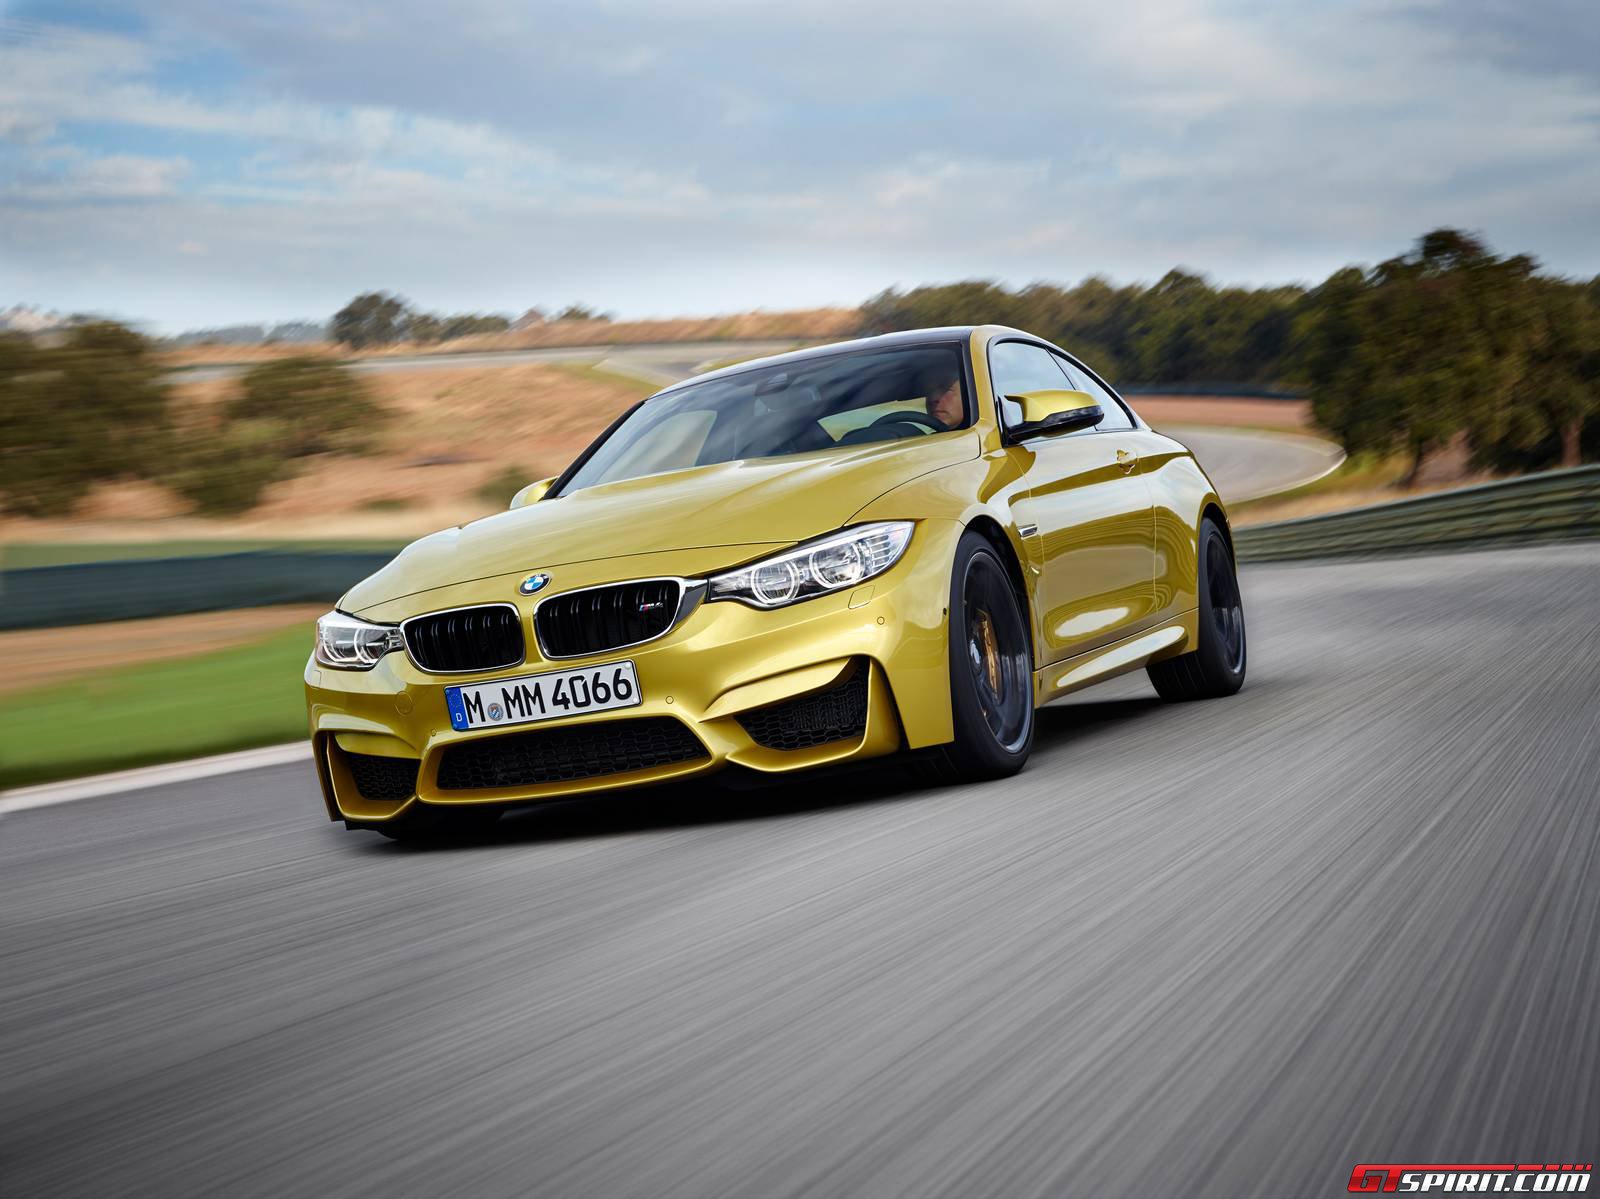 BMW M4 Convertible to Debut at Goodwood Festival of Speed 2014